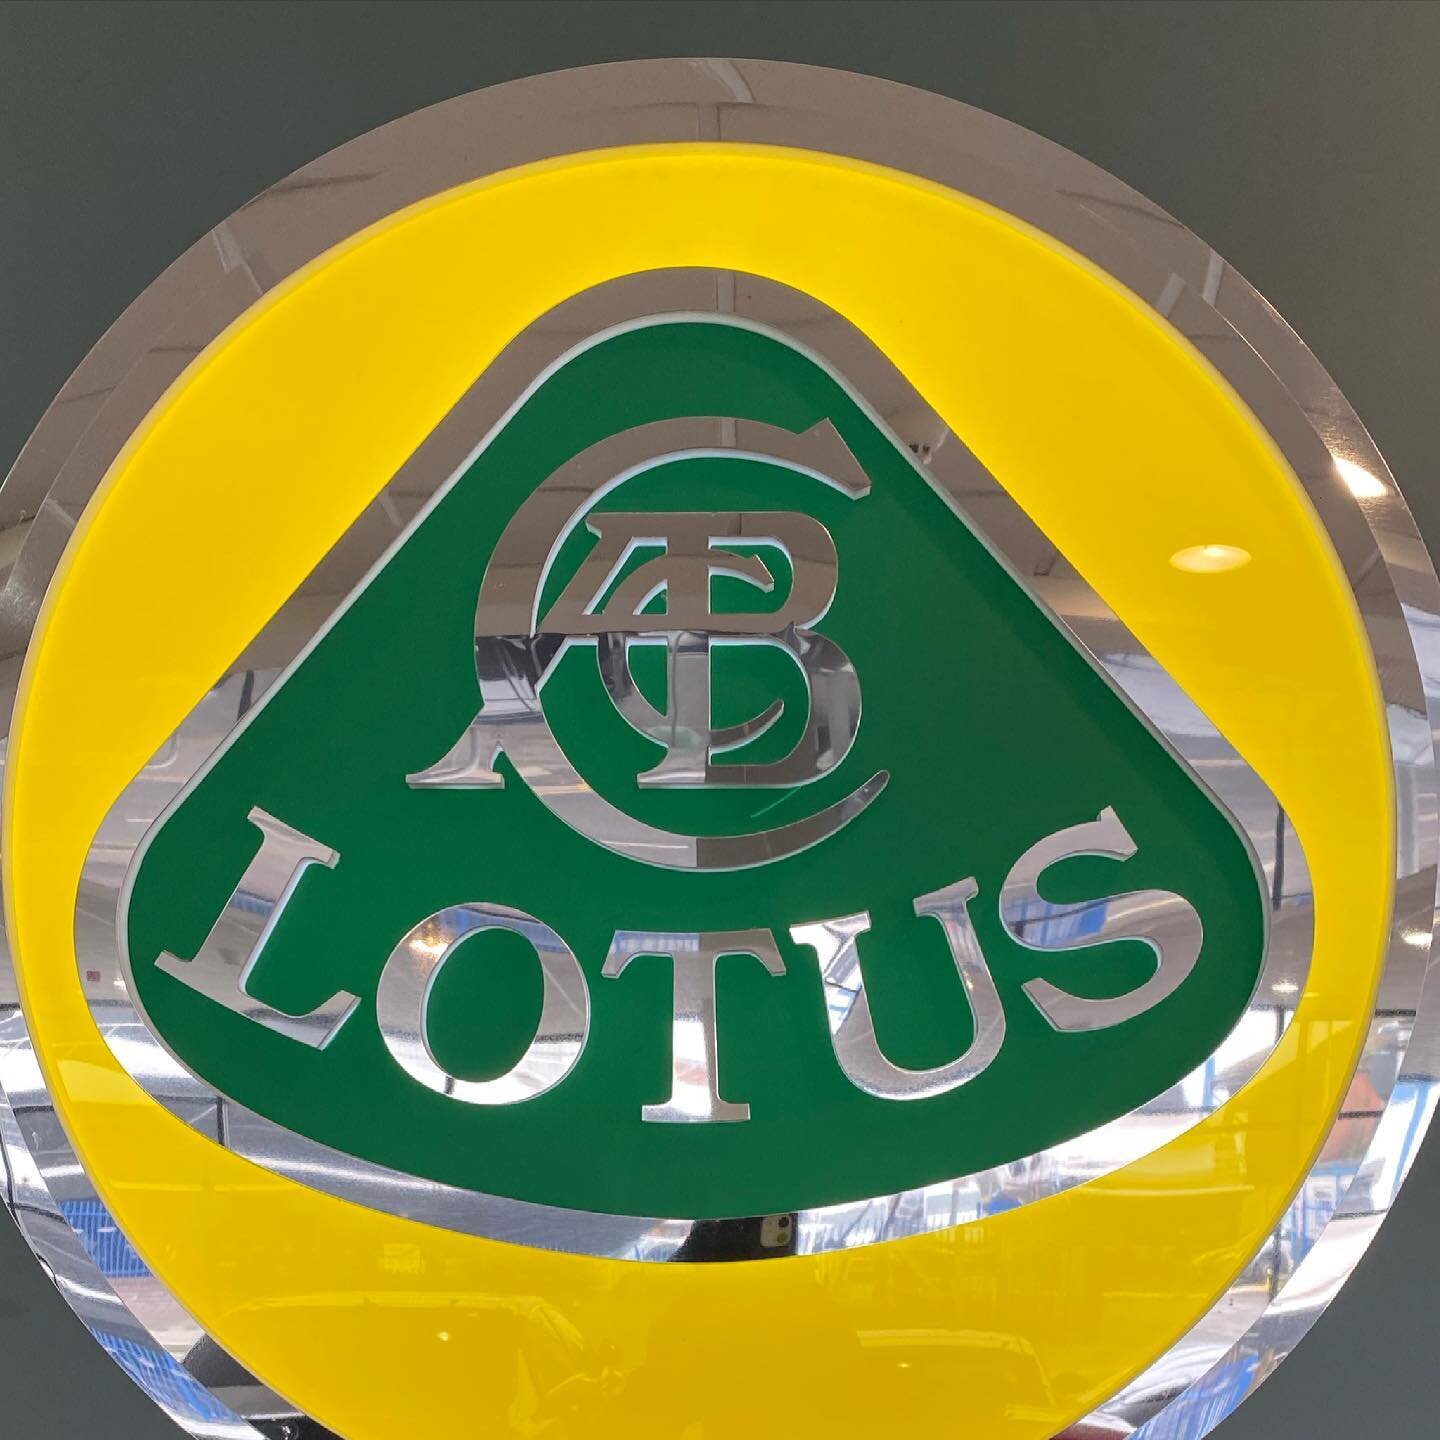 Calling all Lotus fans. 

If I&rsquo;m going to lock in a Final Edition Elise spec, then it&rsquo;s going to happen very soon.

But I need your help.

If you want to be part of TheCarGuys speccing episode, I&rsquo;d like you to send me a landscape fo